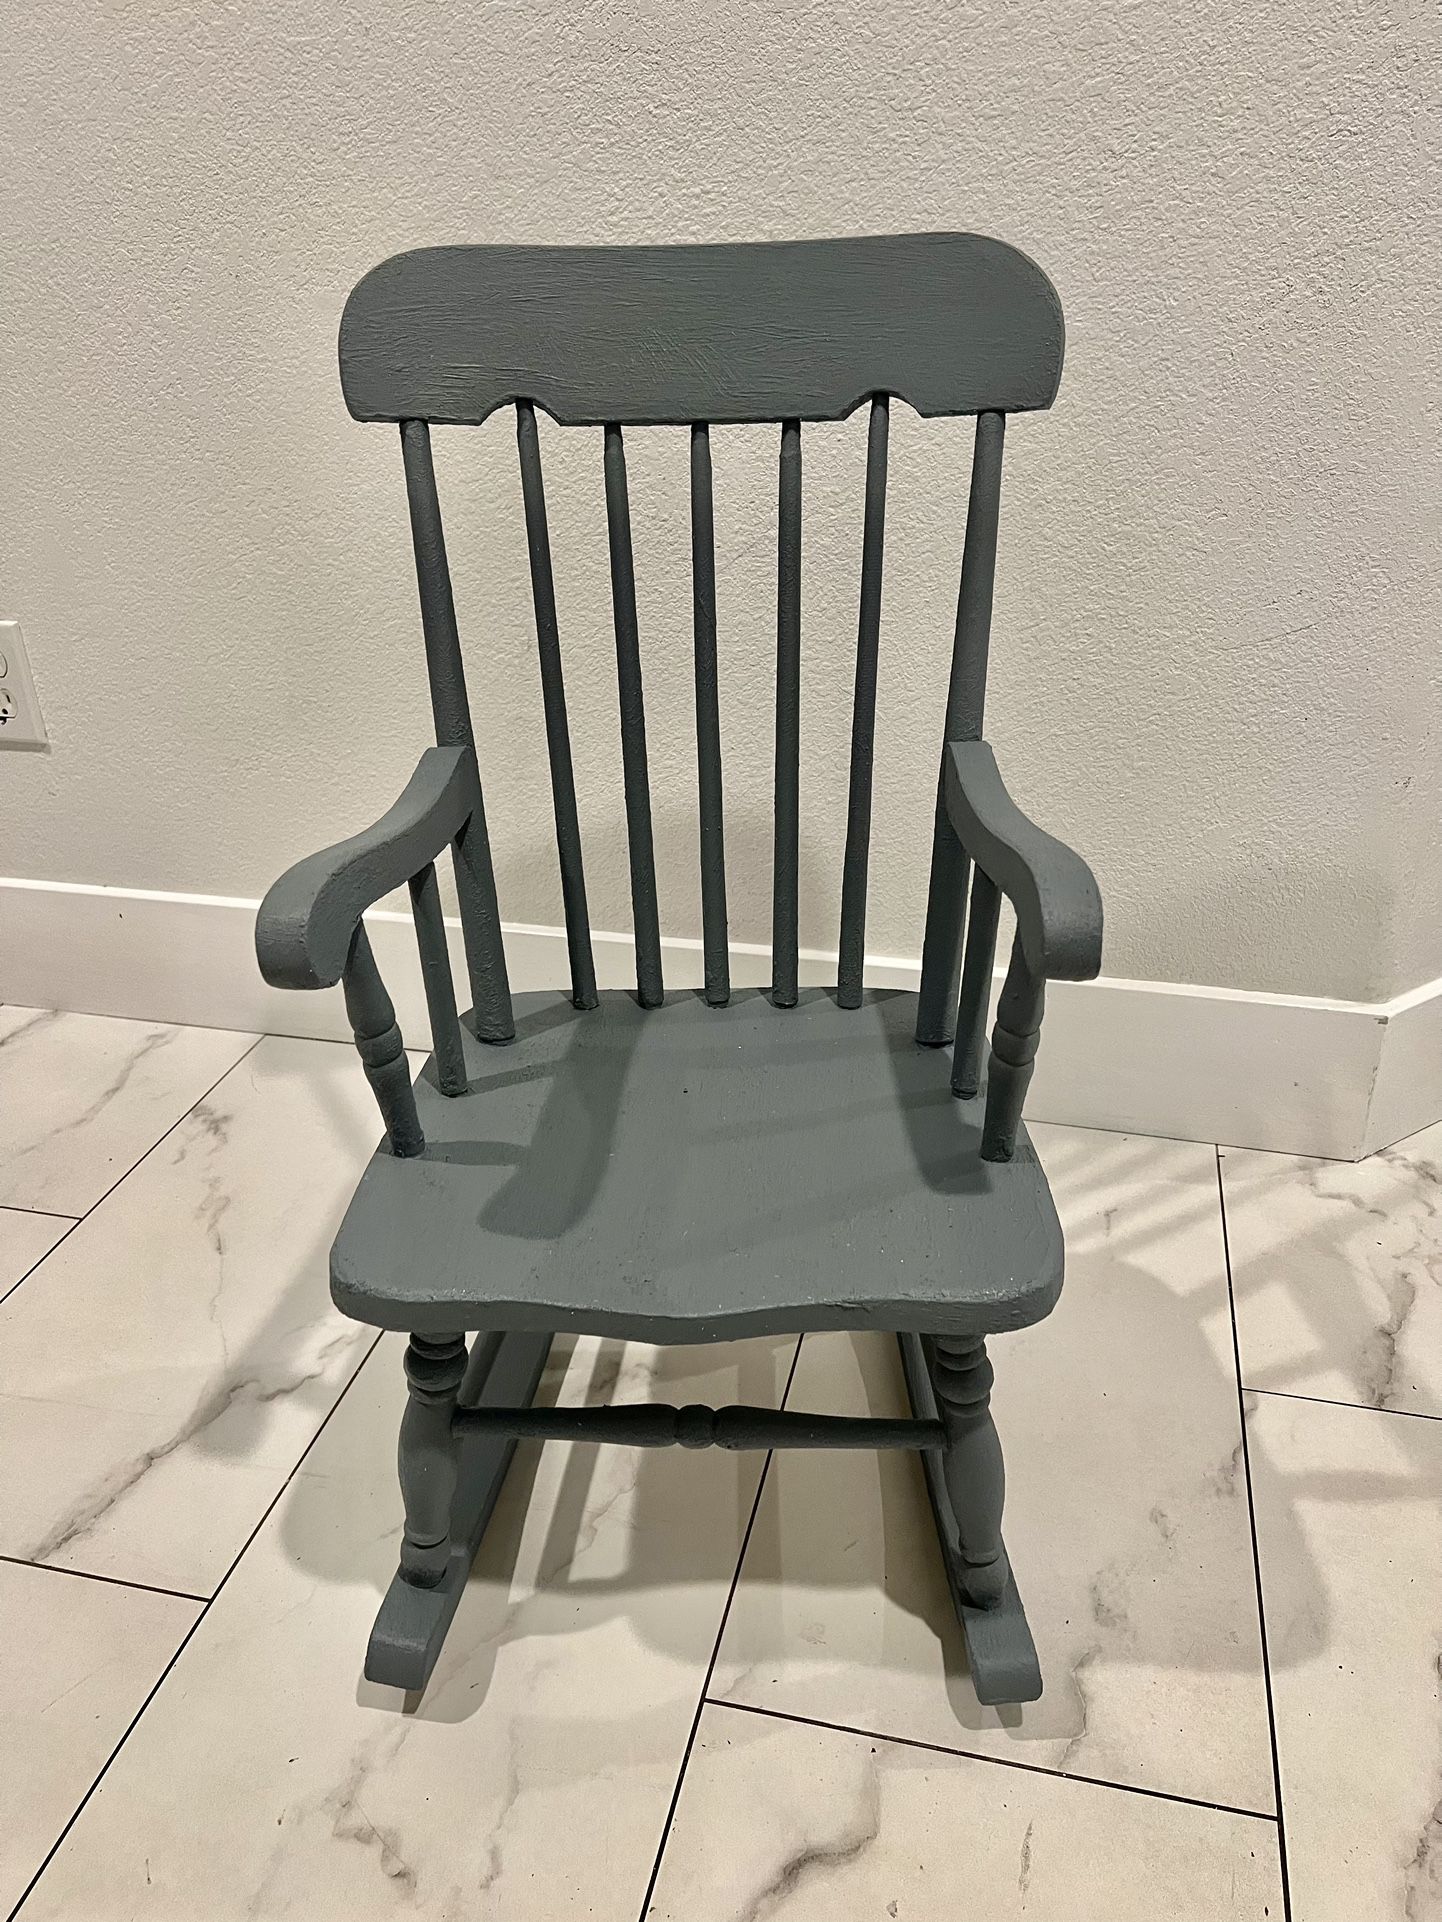 Refinished In Chalk Paint With Texture - Blue Small Rocking Chair For Kids